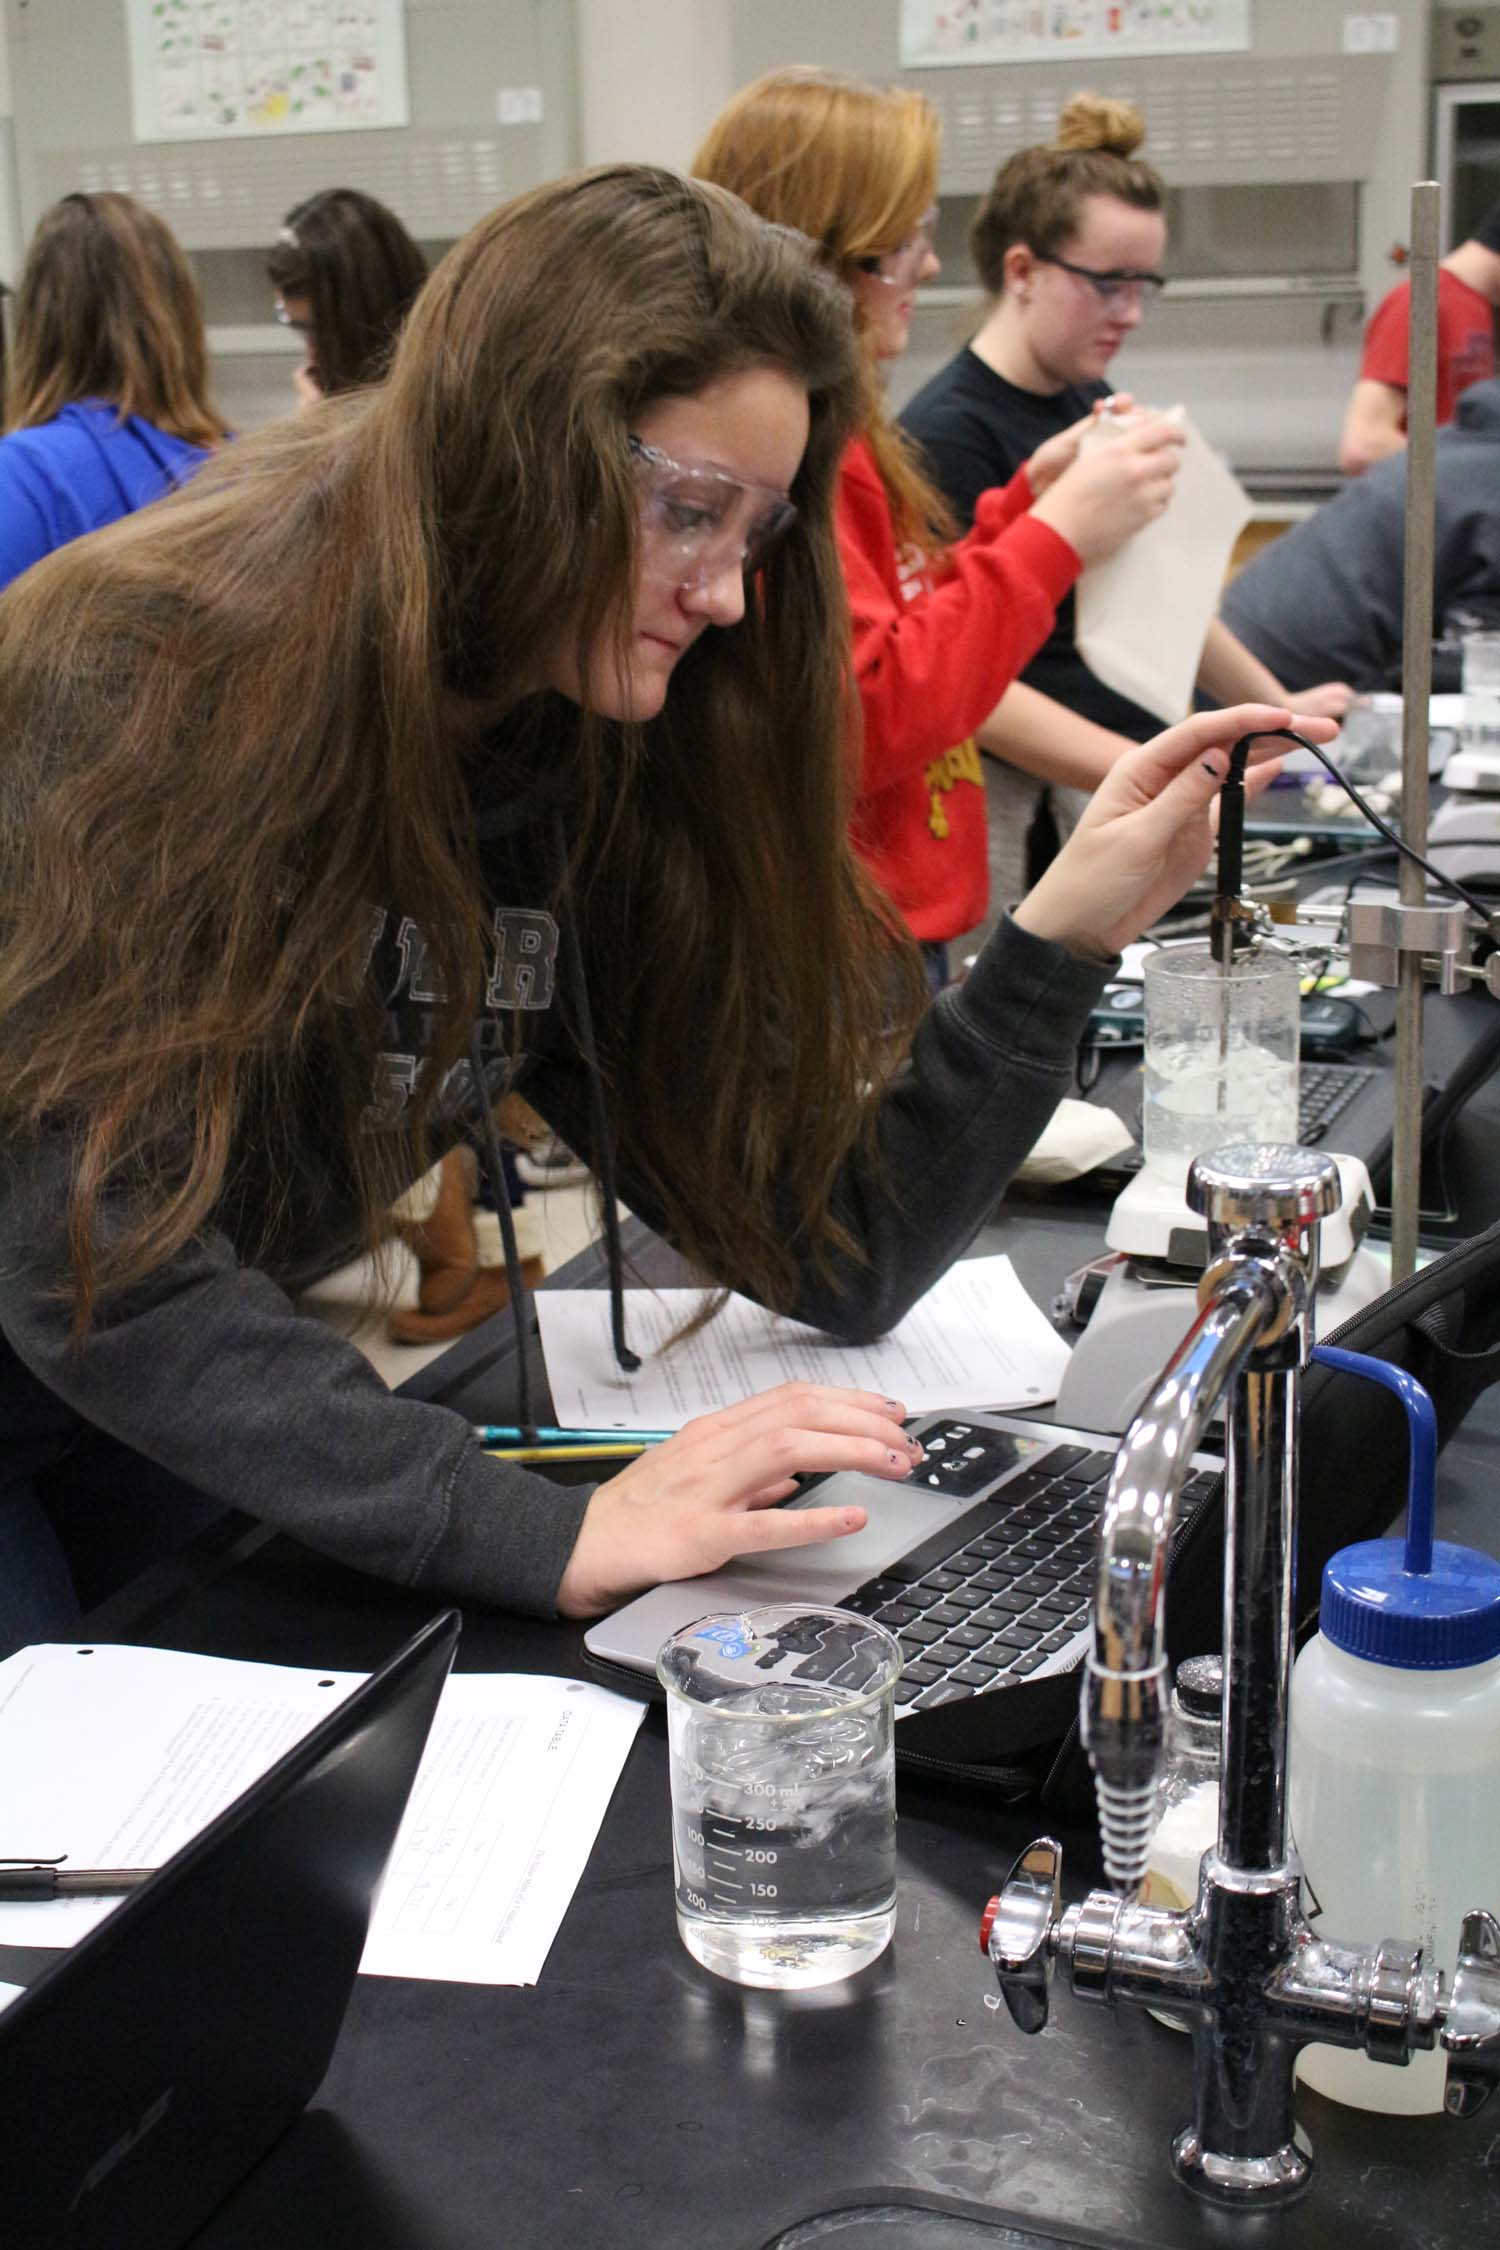 Junior Kayla Fox uses her Chromebook for a chemistry lab on Jan. 22.